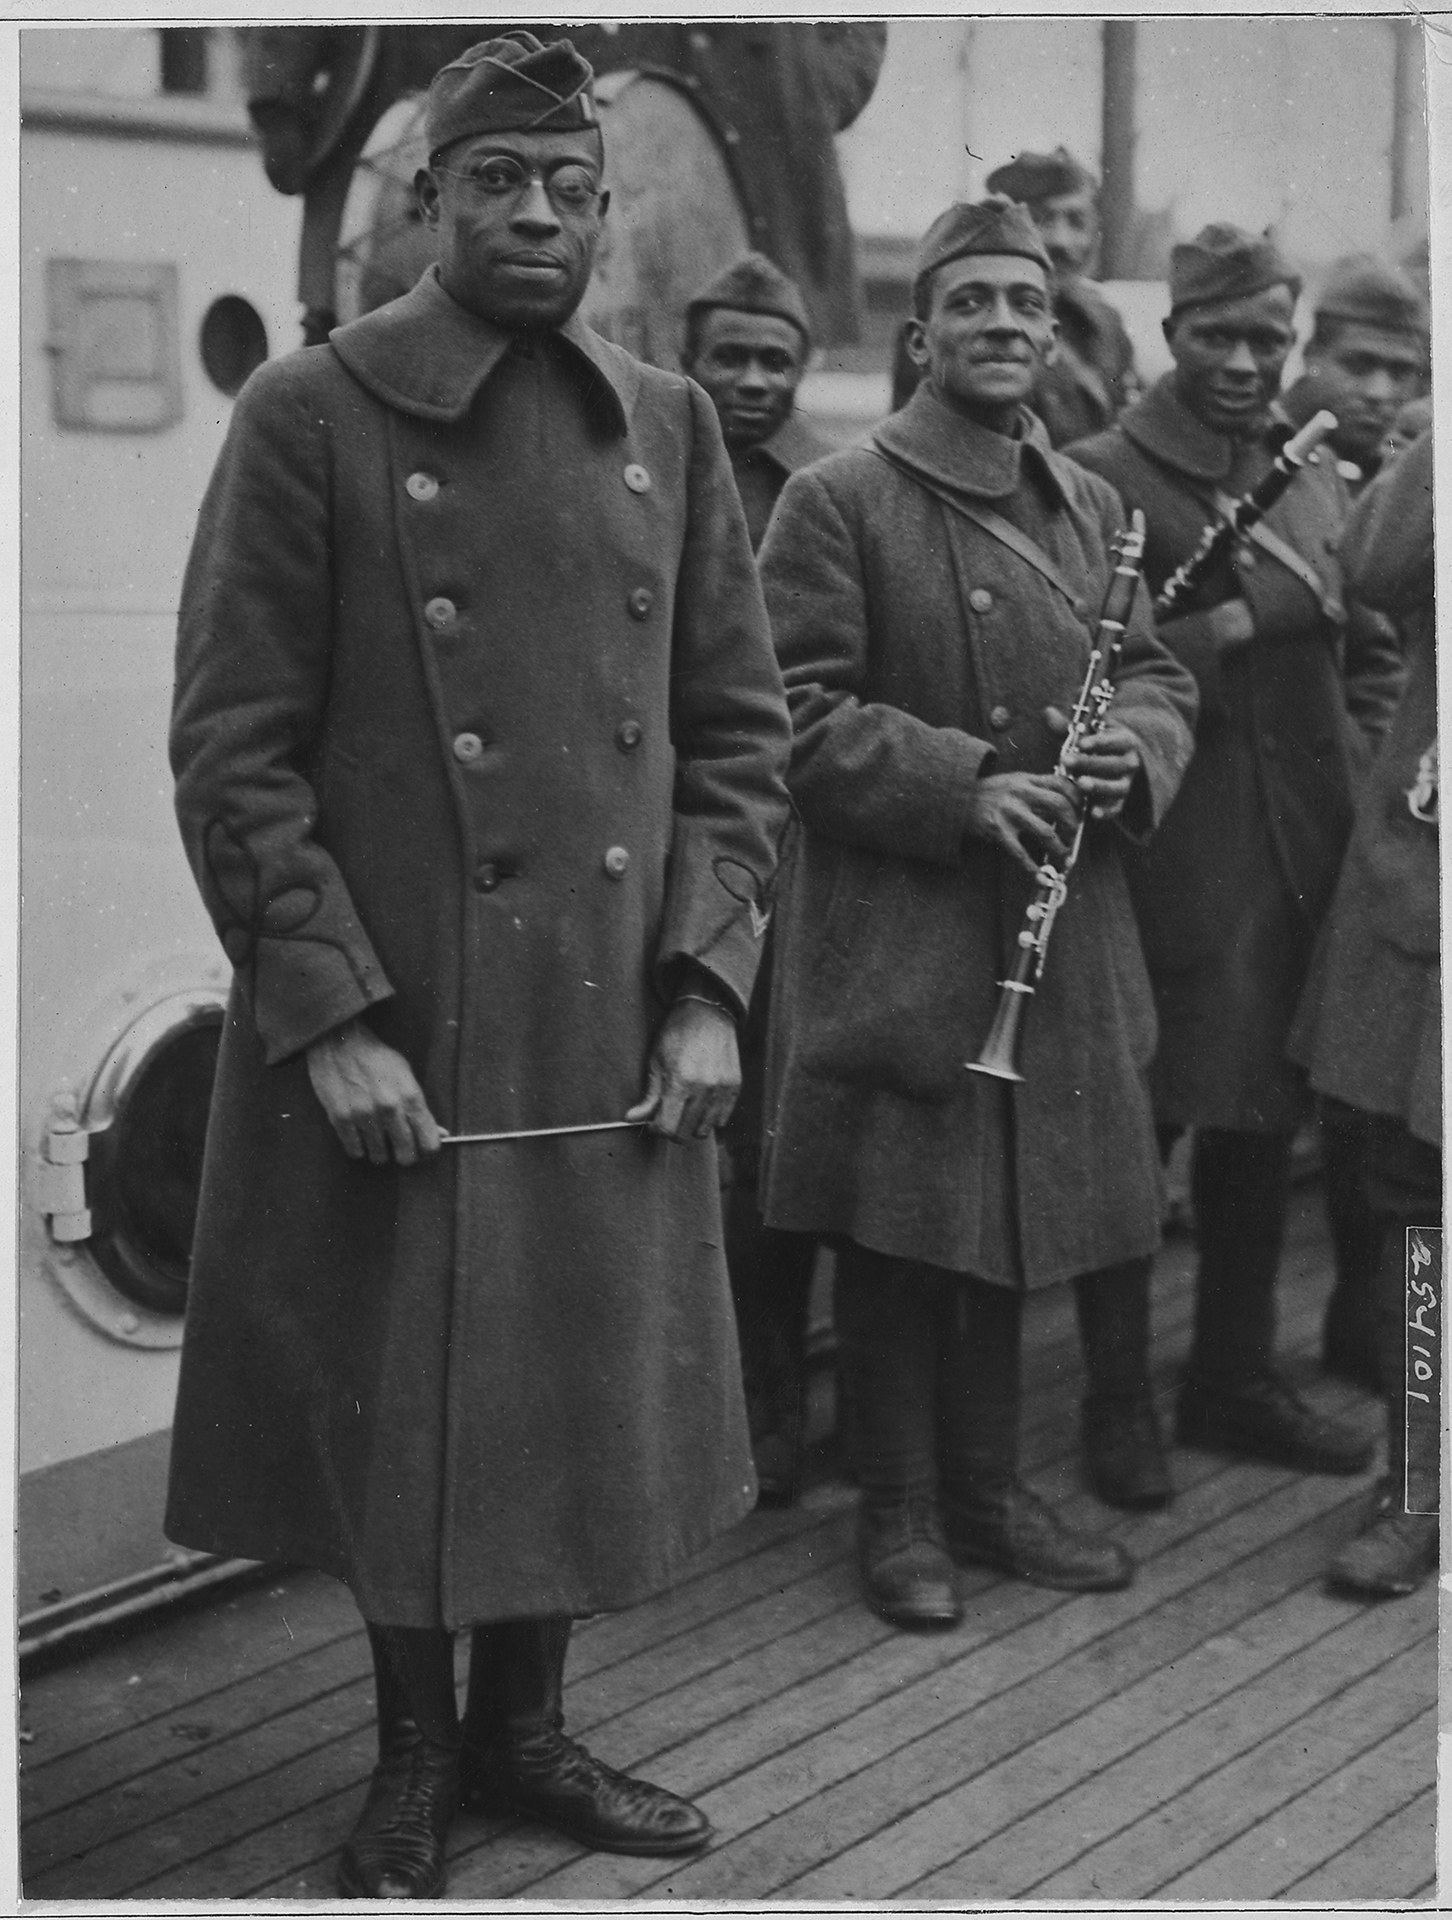 James Reese Europe and his 369th Regiment bandmates in 1918, ready to ship out for Europe. (Photo courtesy of the U.S. National Archives and Records Office)